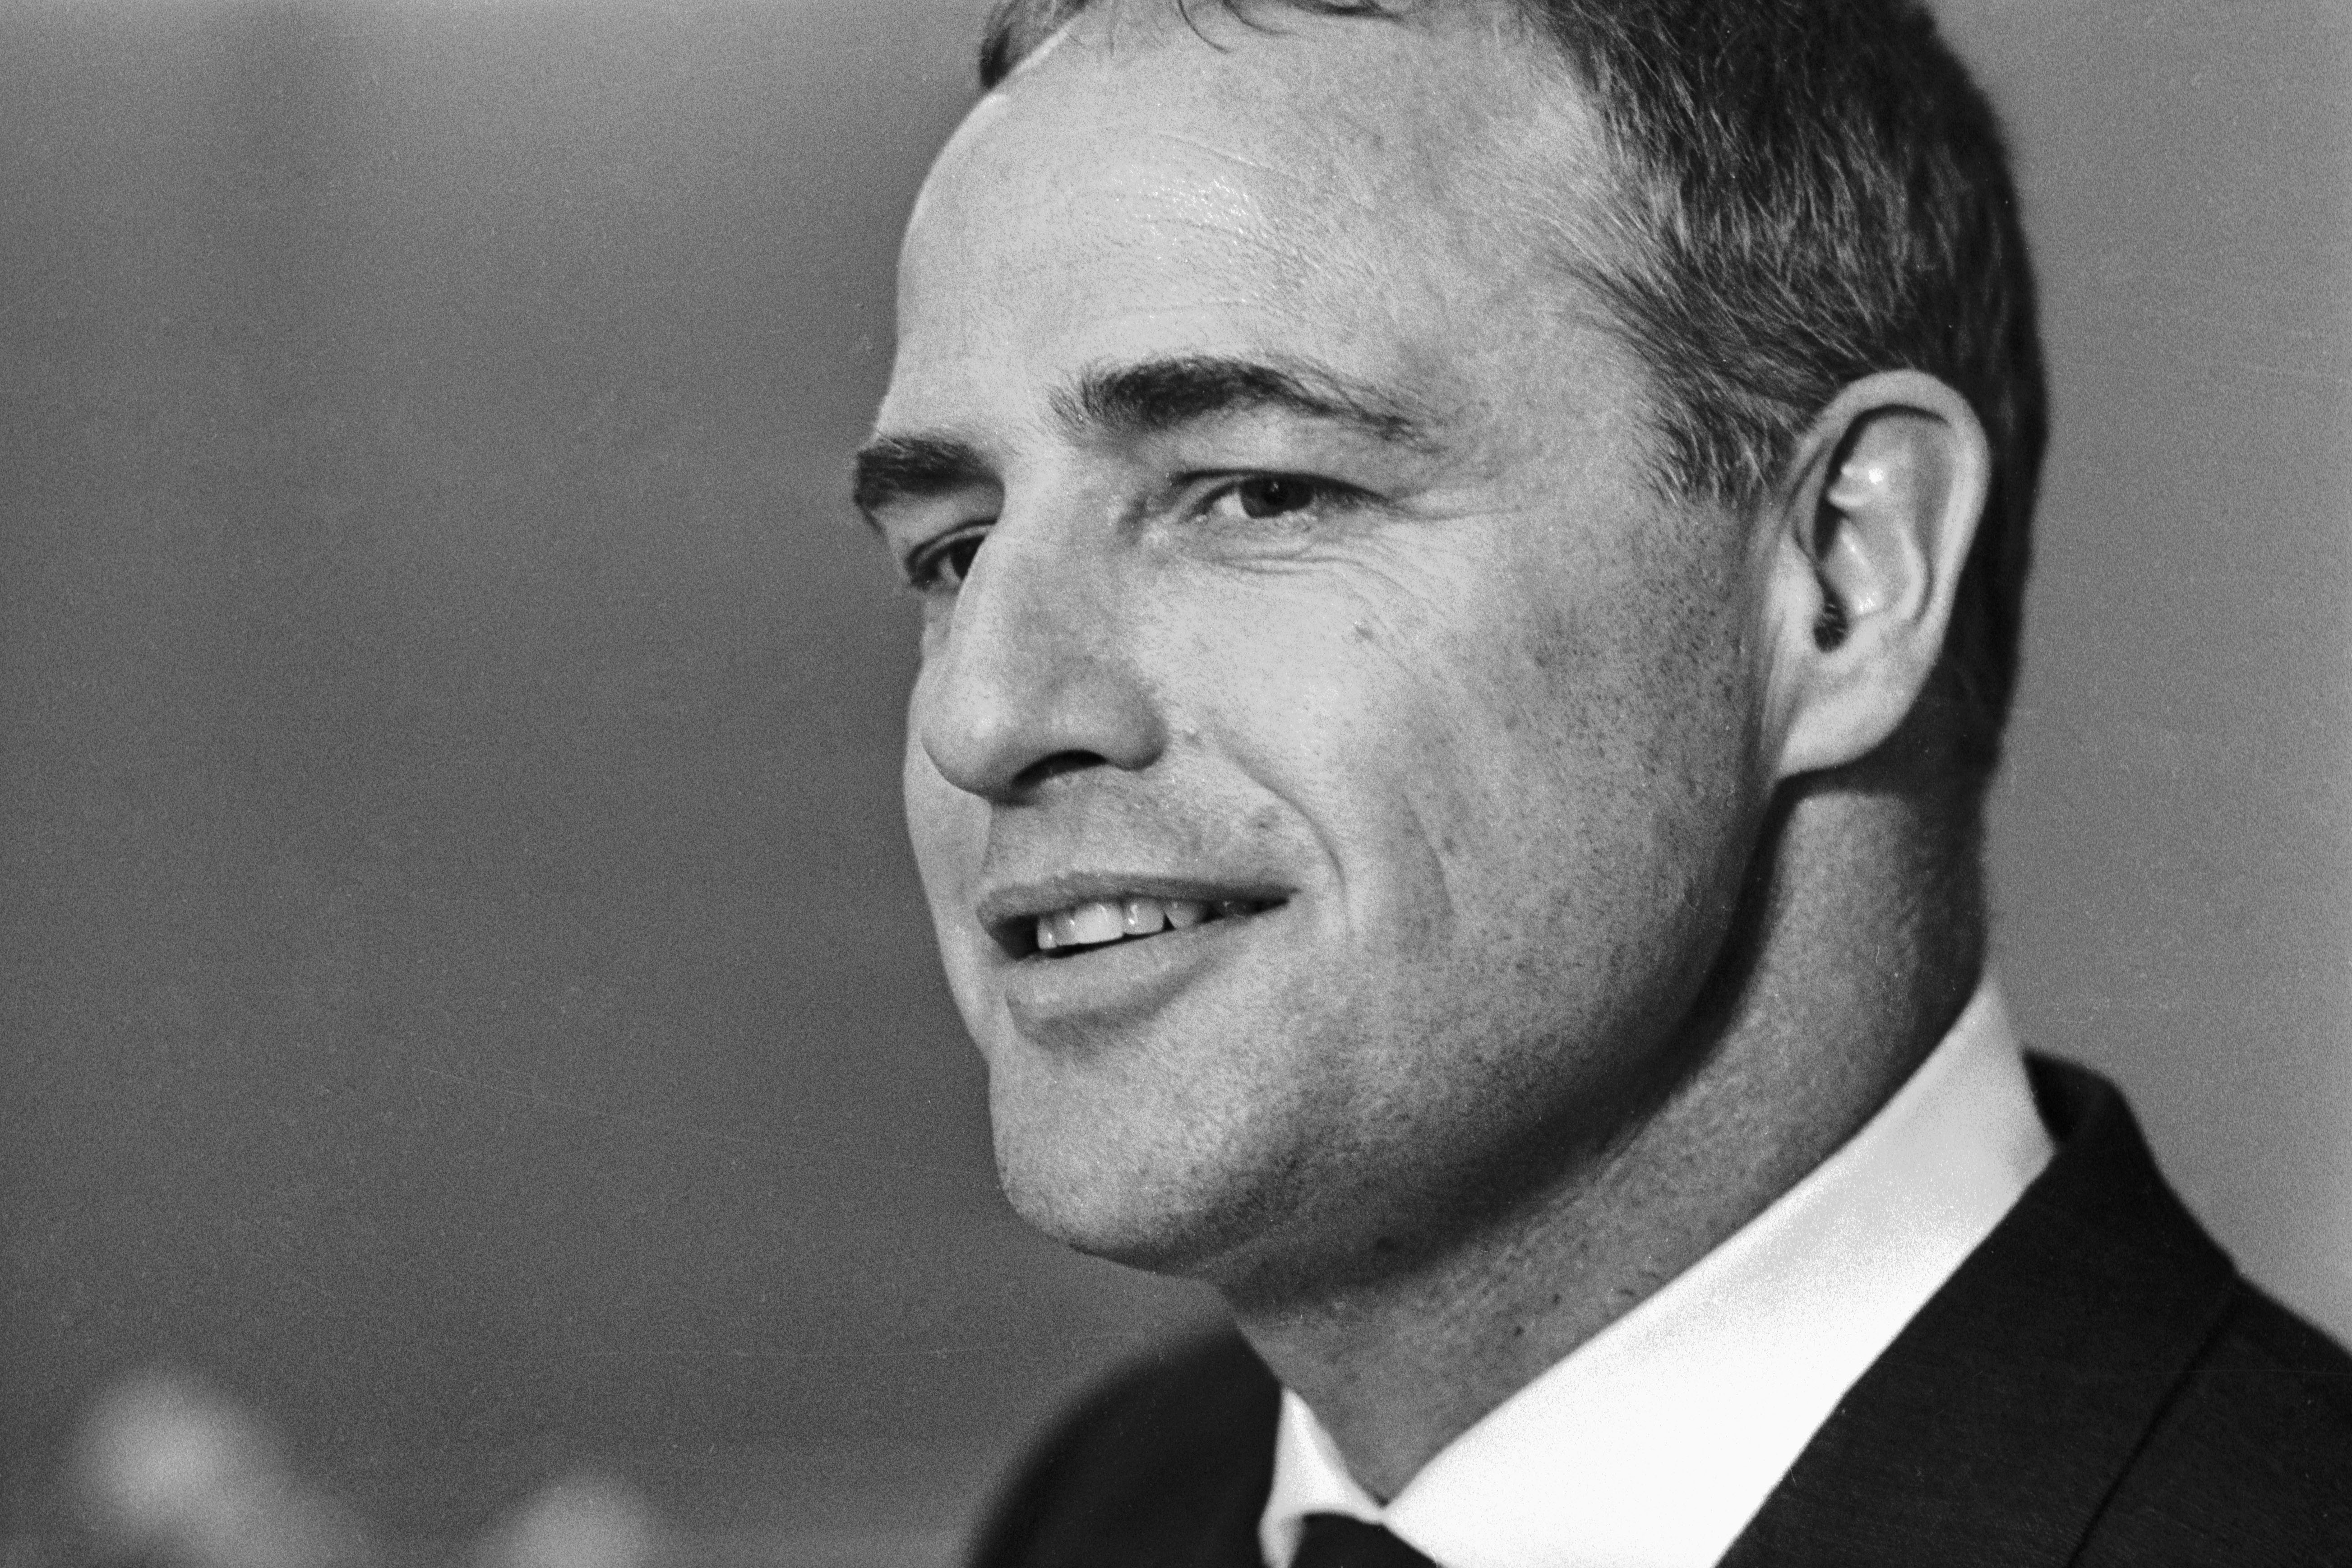 A black and white photo of Marlon Brando wearing a suit.